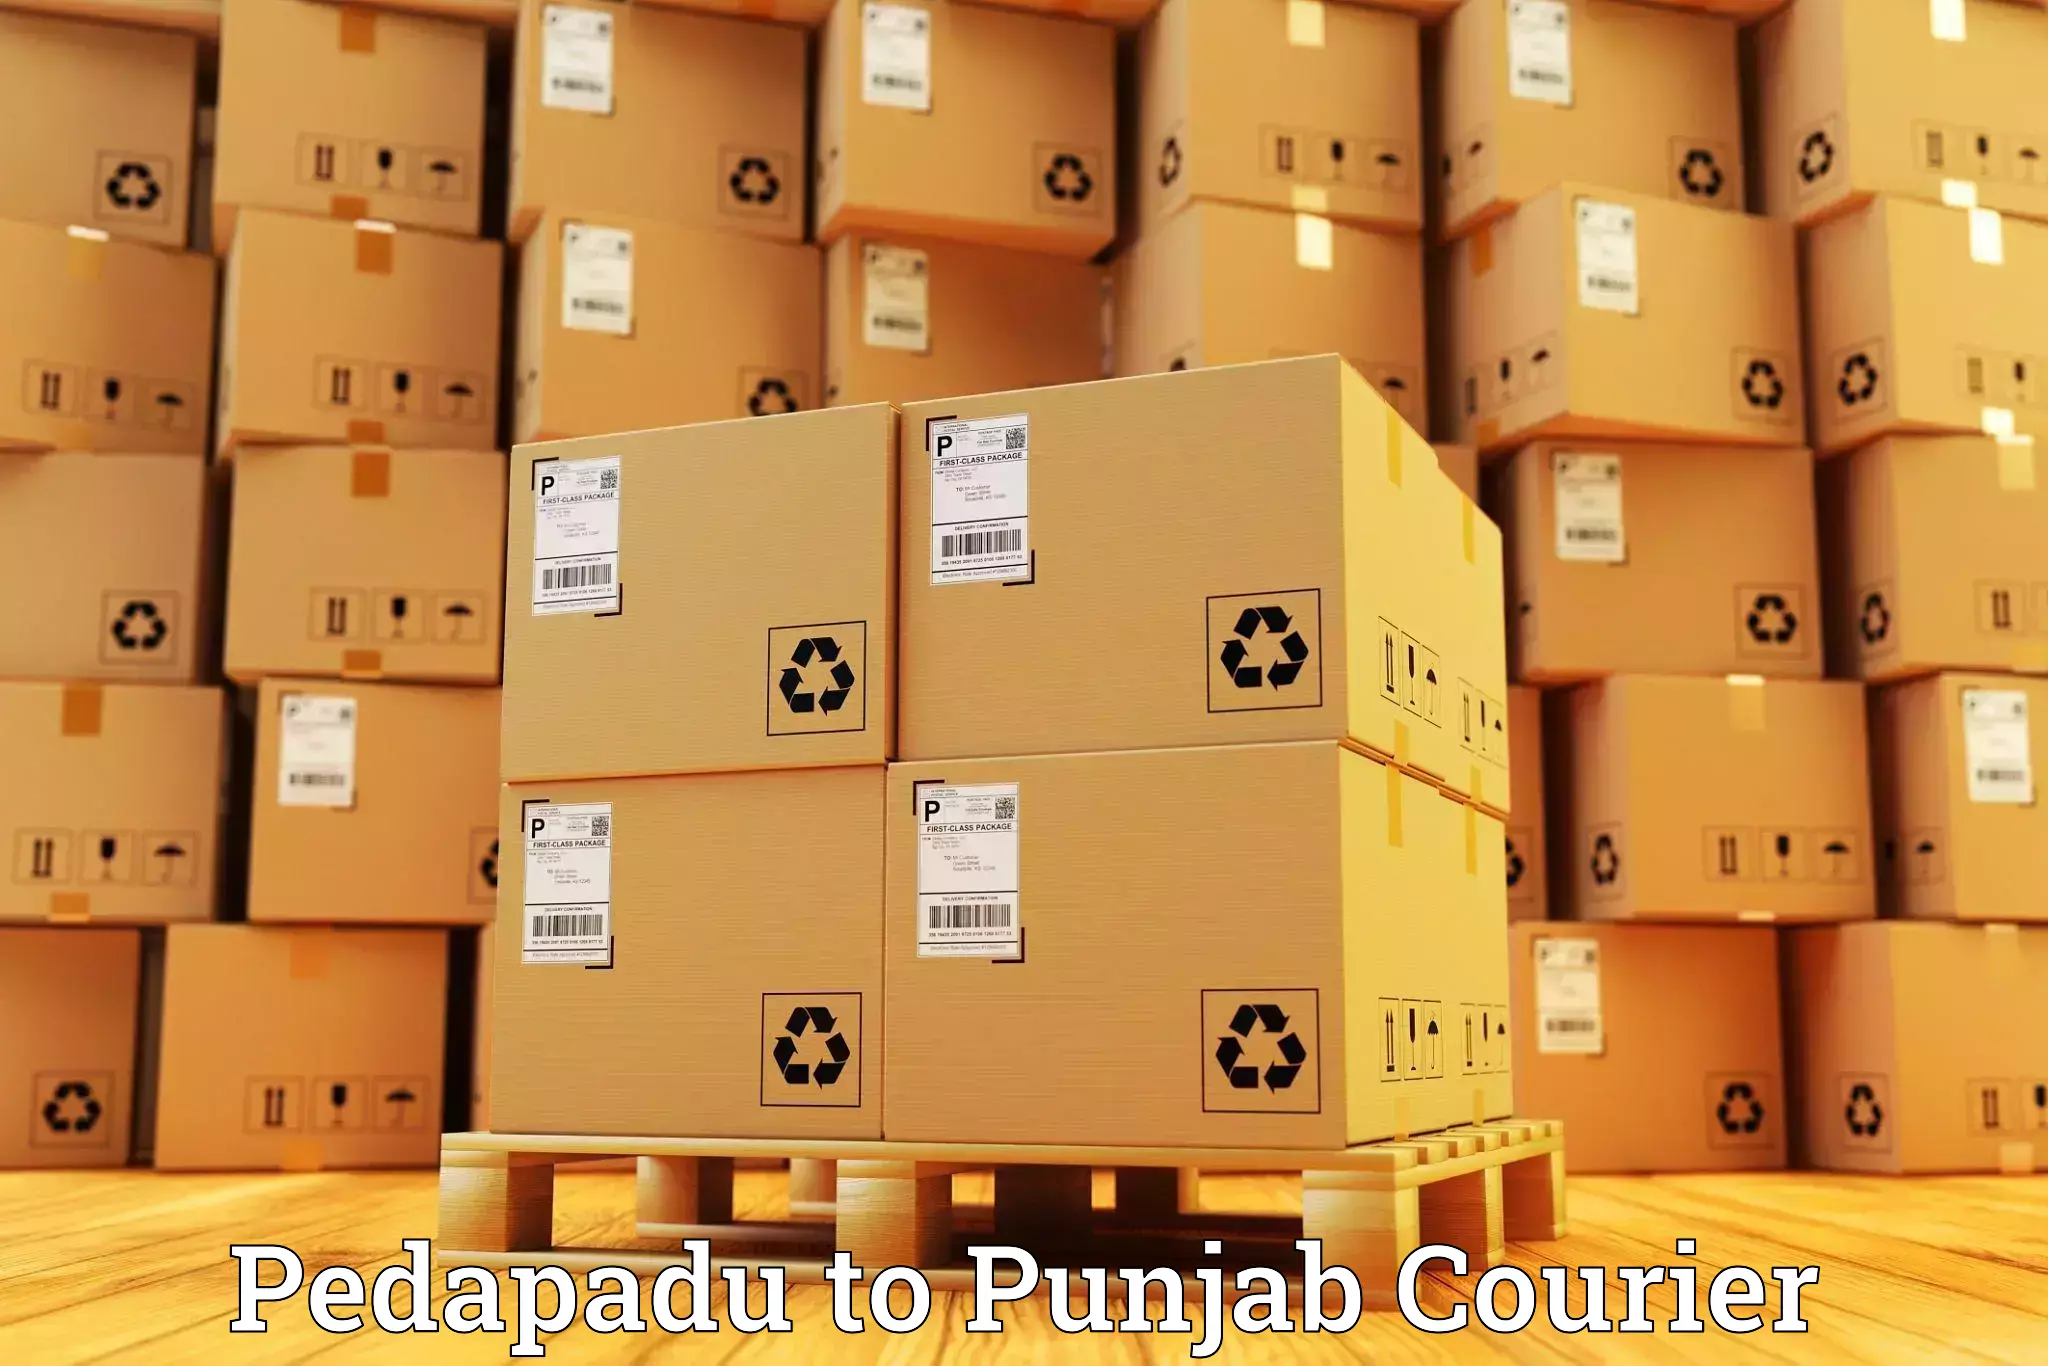 Small parcel delivery in Pedapadu to Punjab